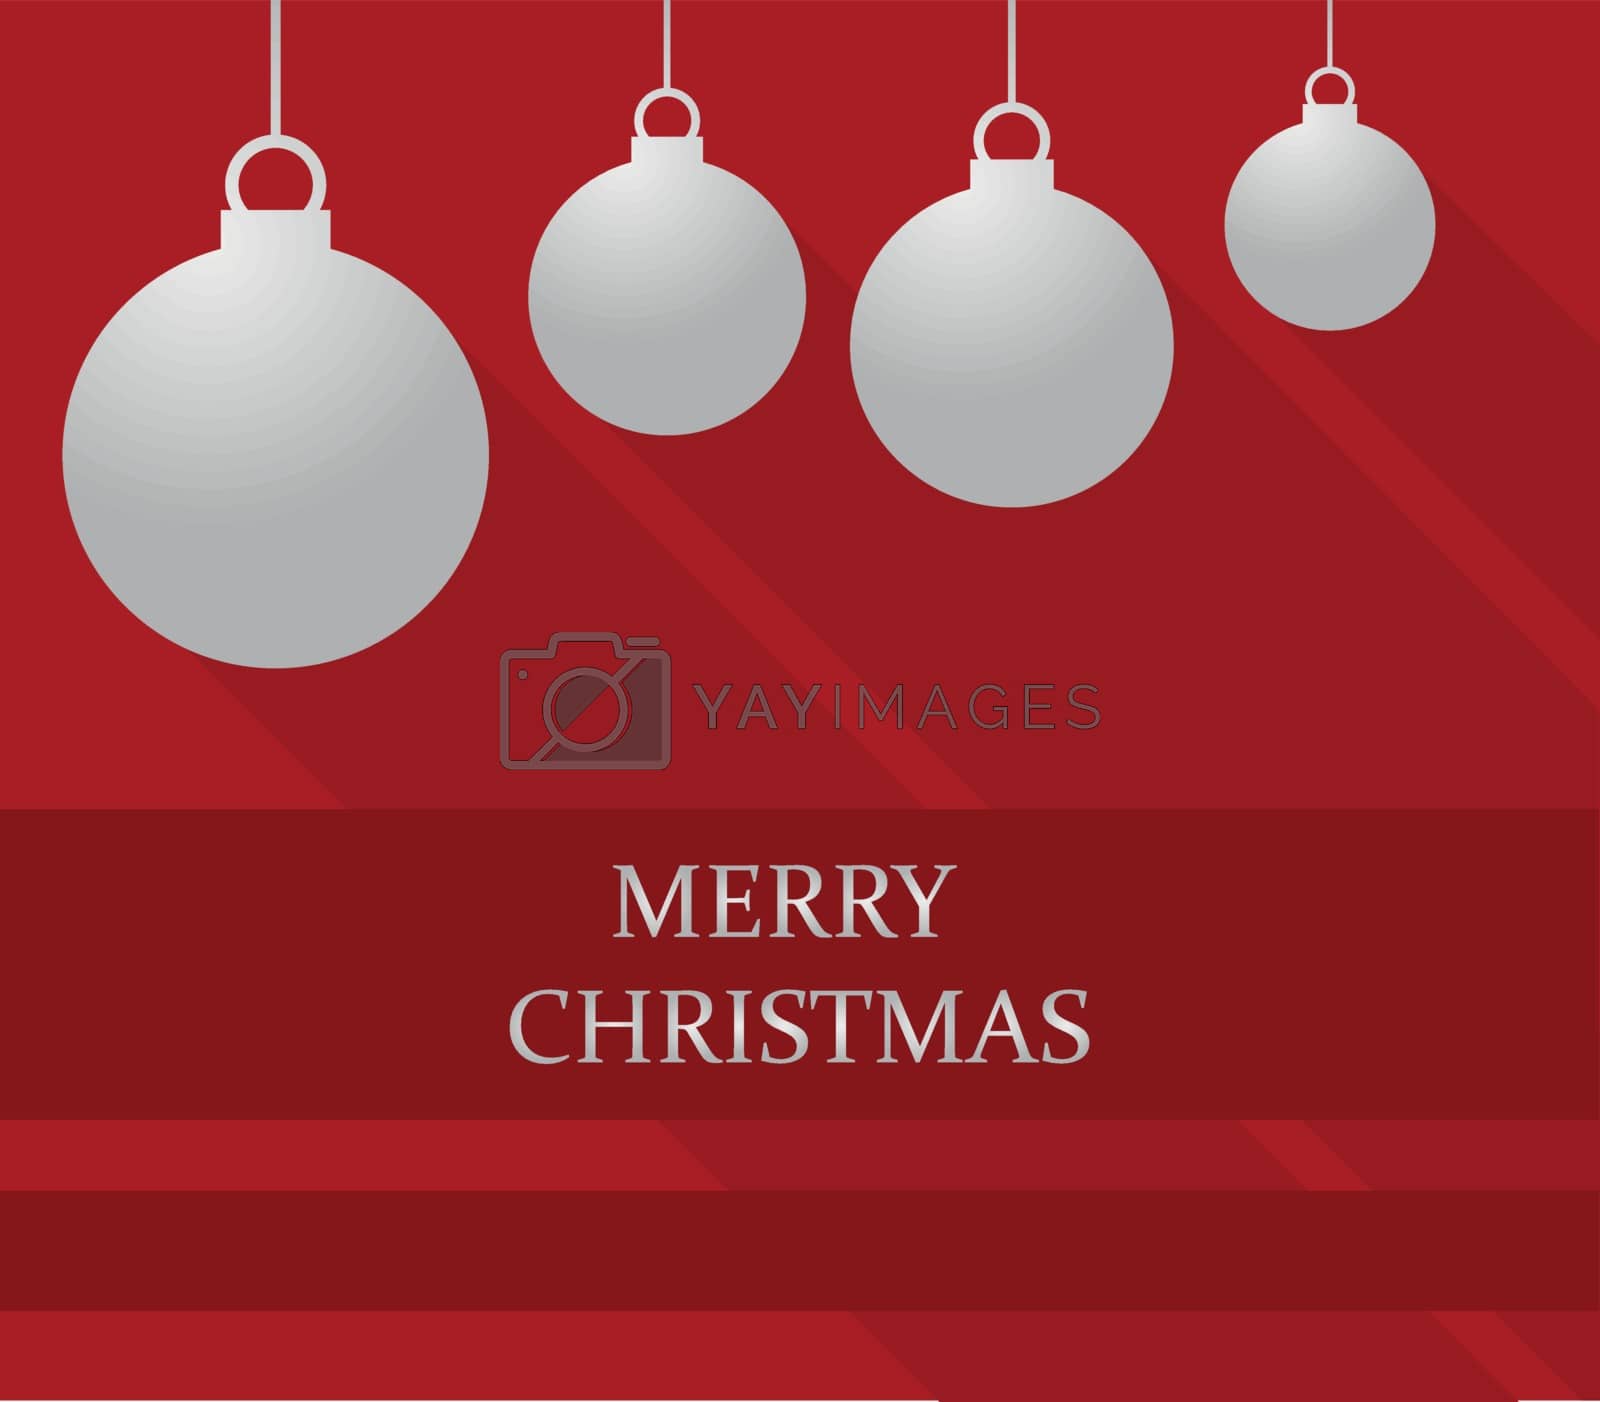 Royalty free image of merry christmas by Mark1987